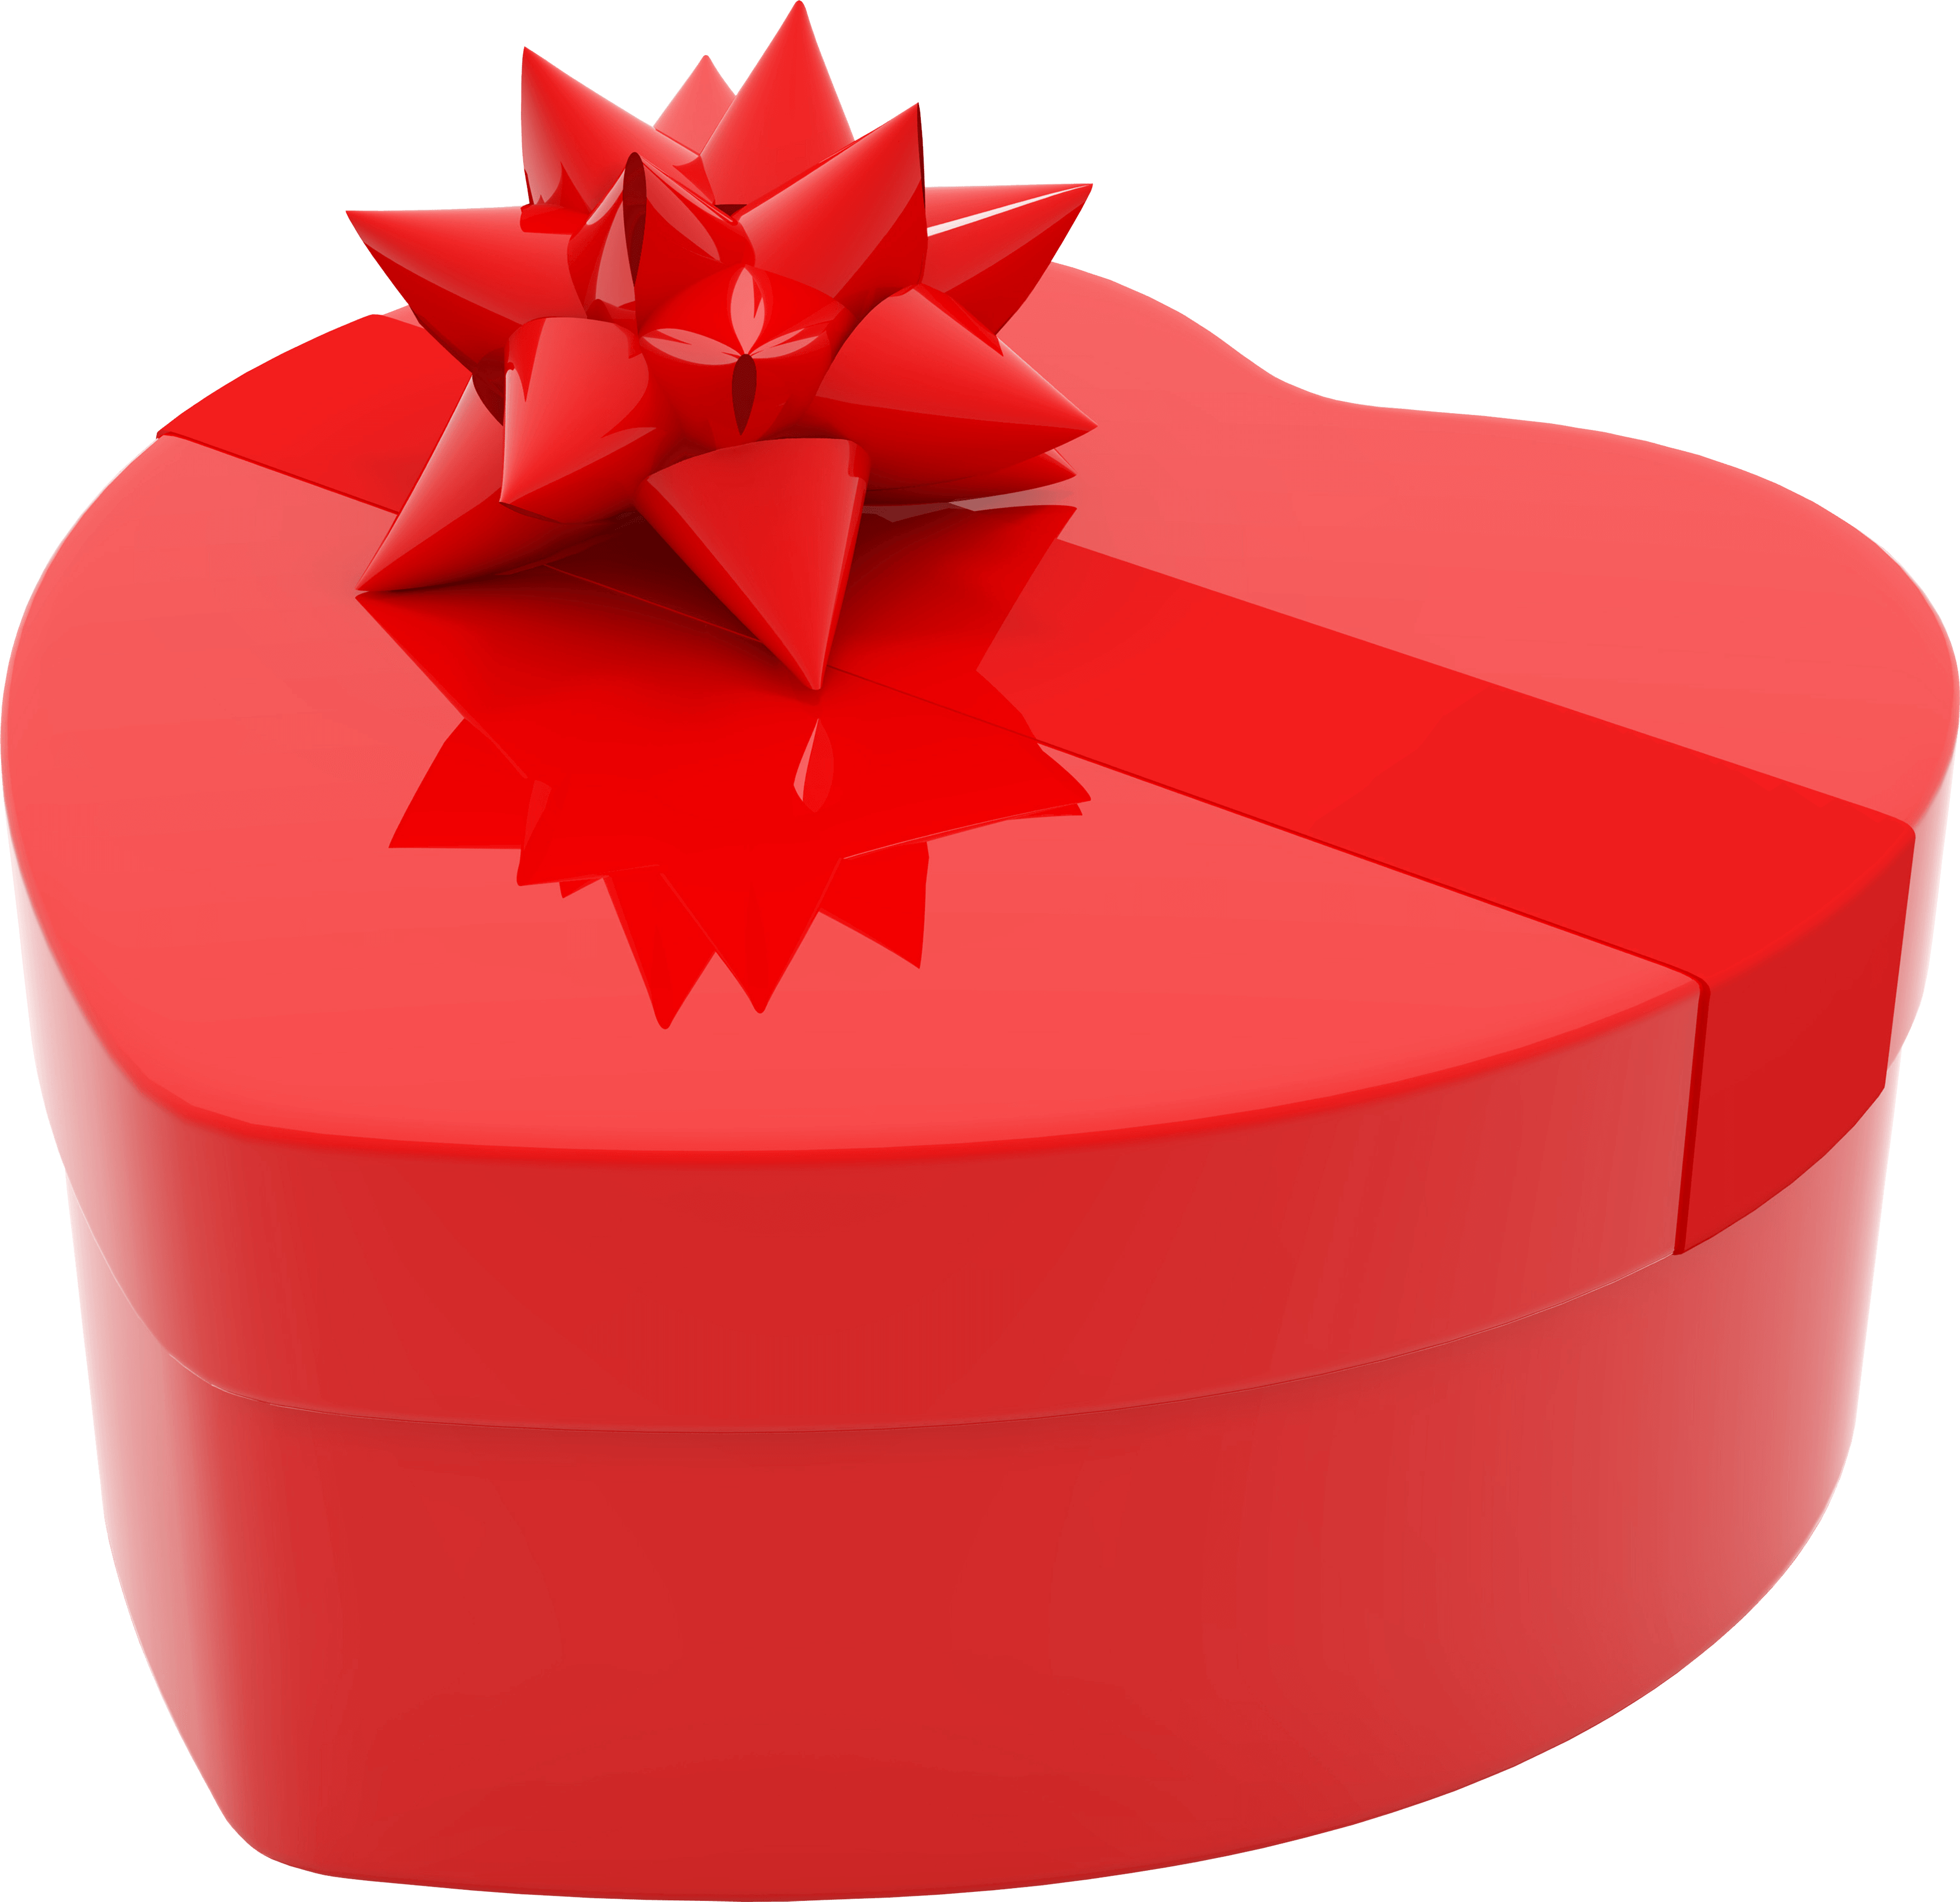 Gift Red Box Png Image PNG Image